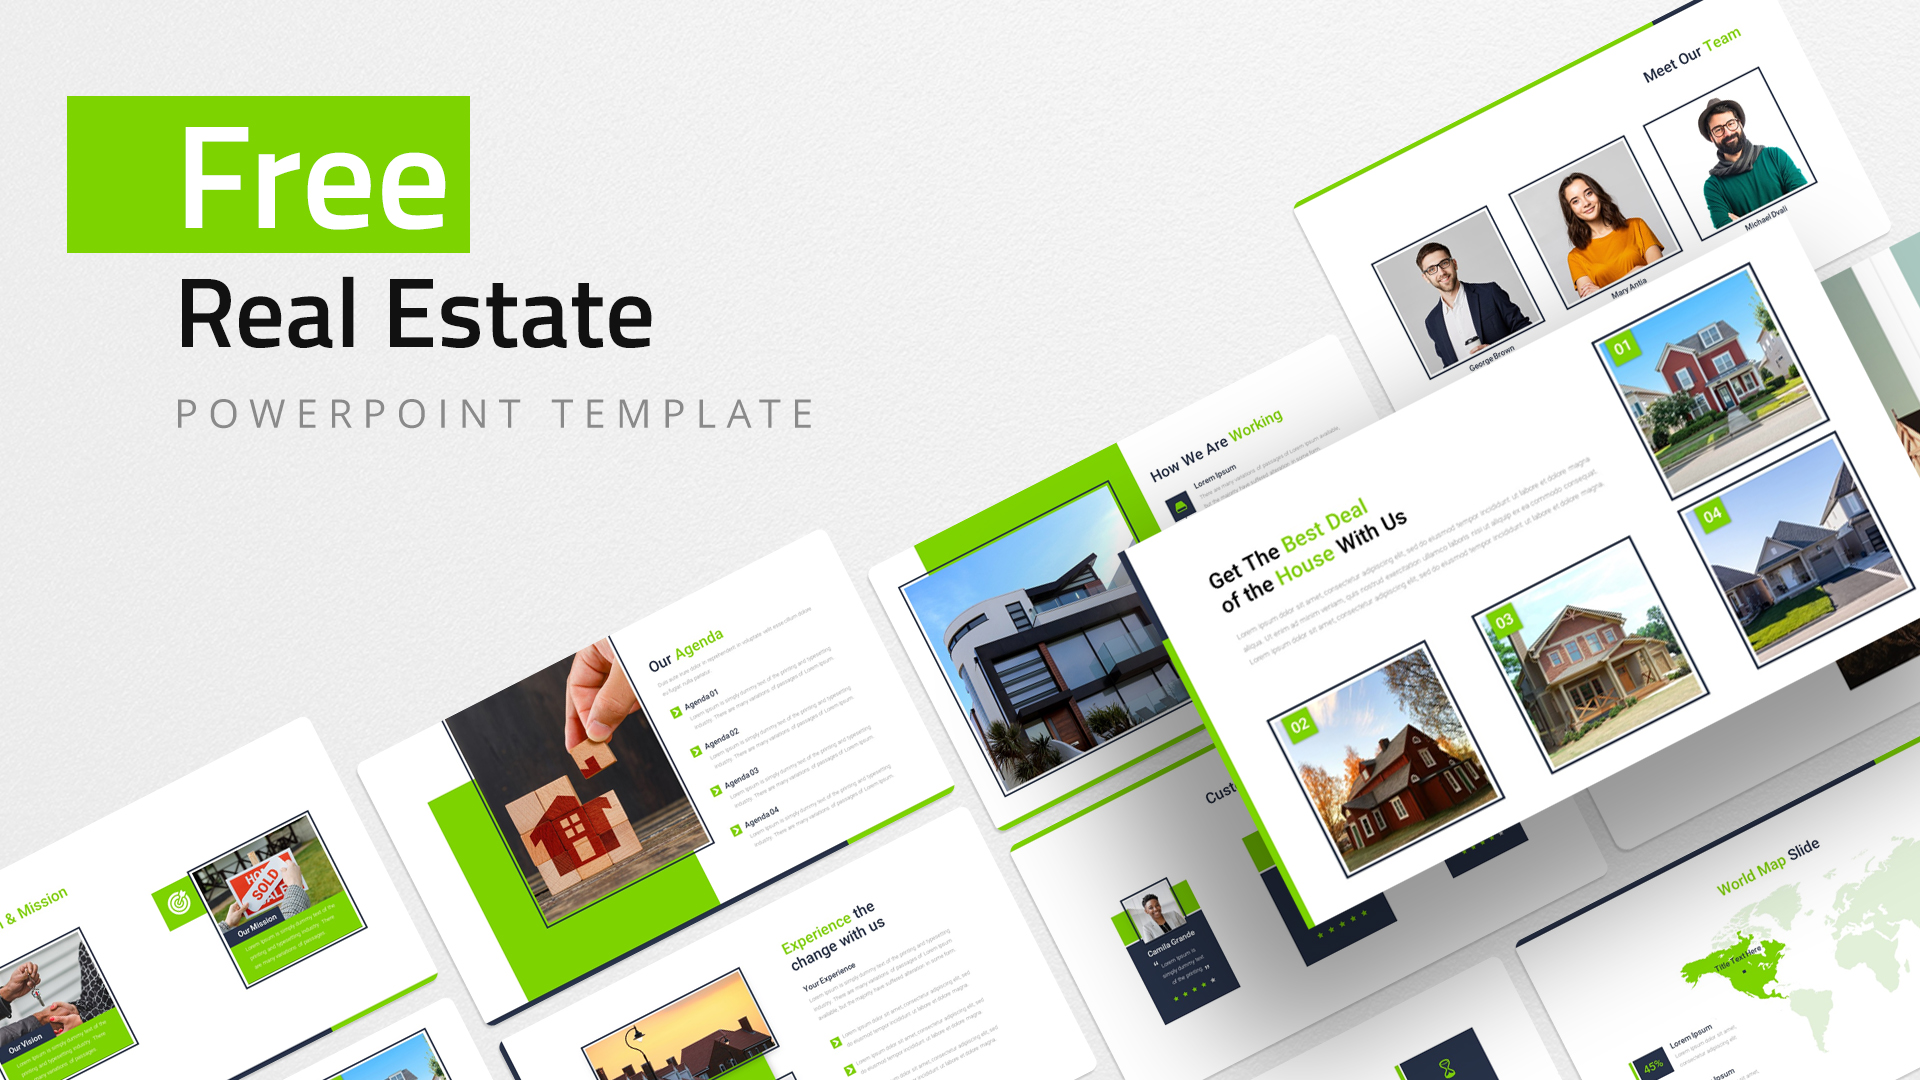 Free_Real_Estate_PowerPoint_Template